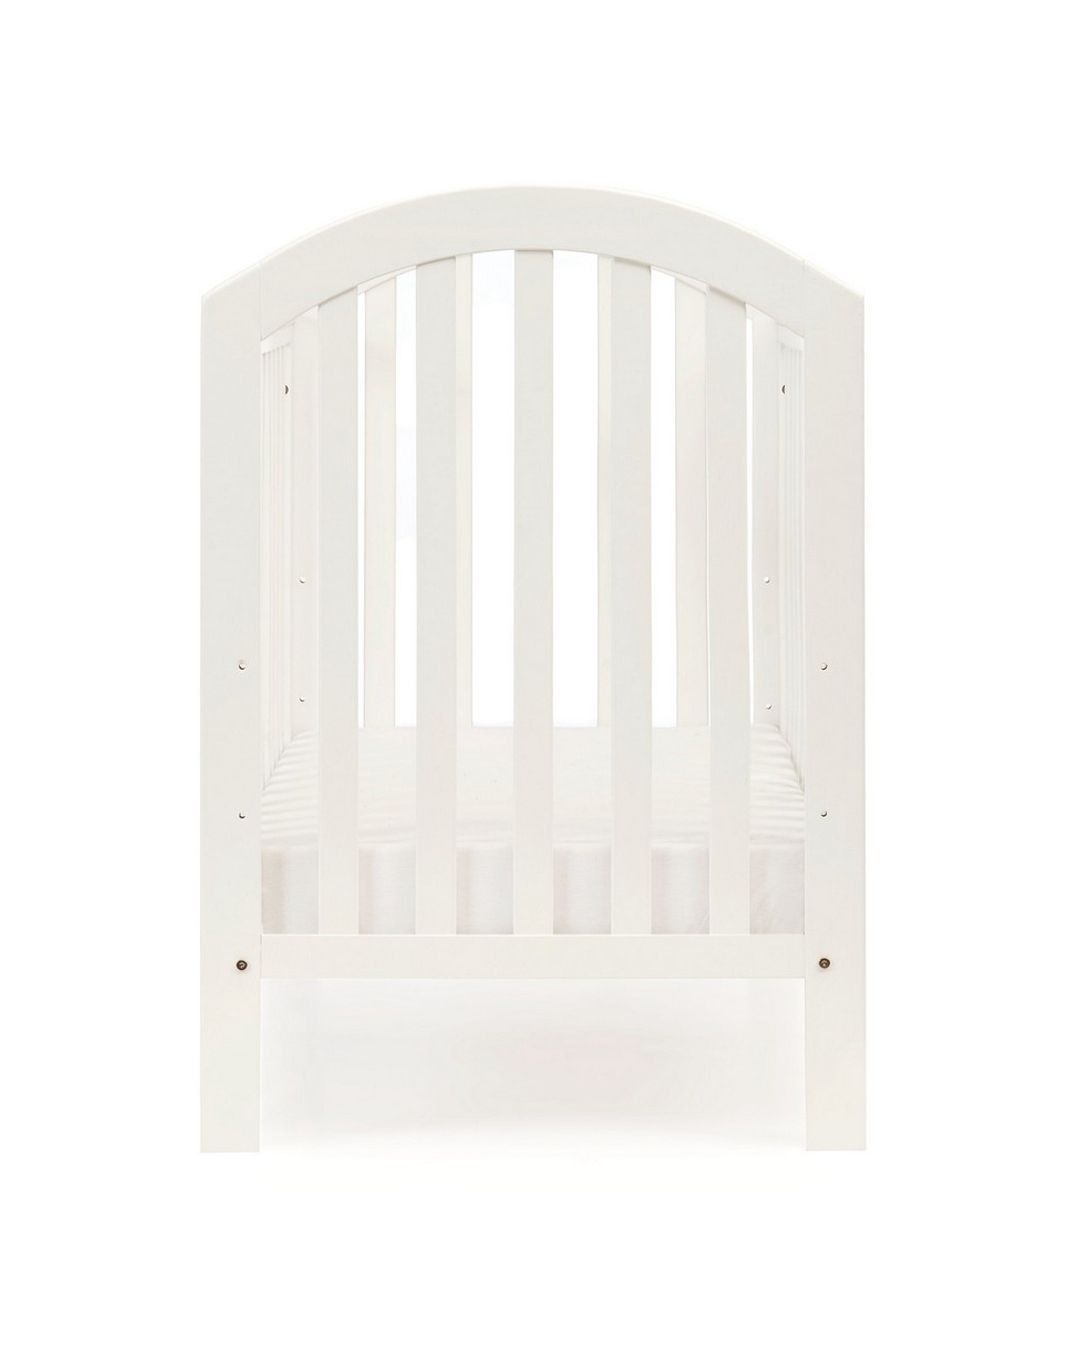 Mothercare Marlow Cot White Crib